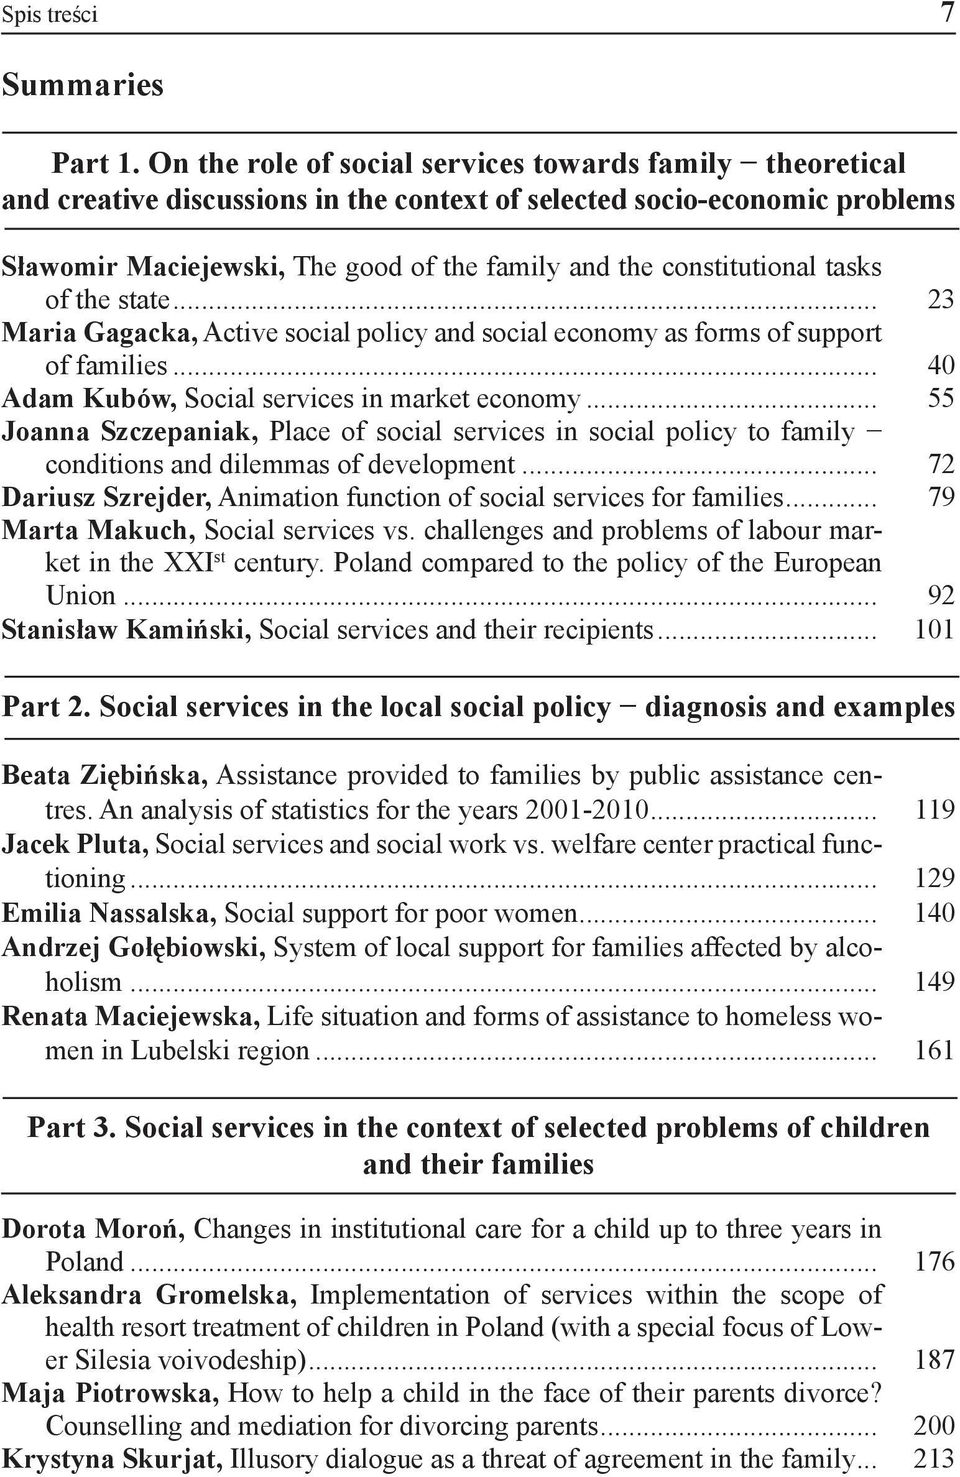 constitutional tasks of the state... 23 Maria Gagacka, Active social policy and social economy as forms of support of families... 40 Adam Kubów, Social services in market economy.